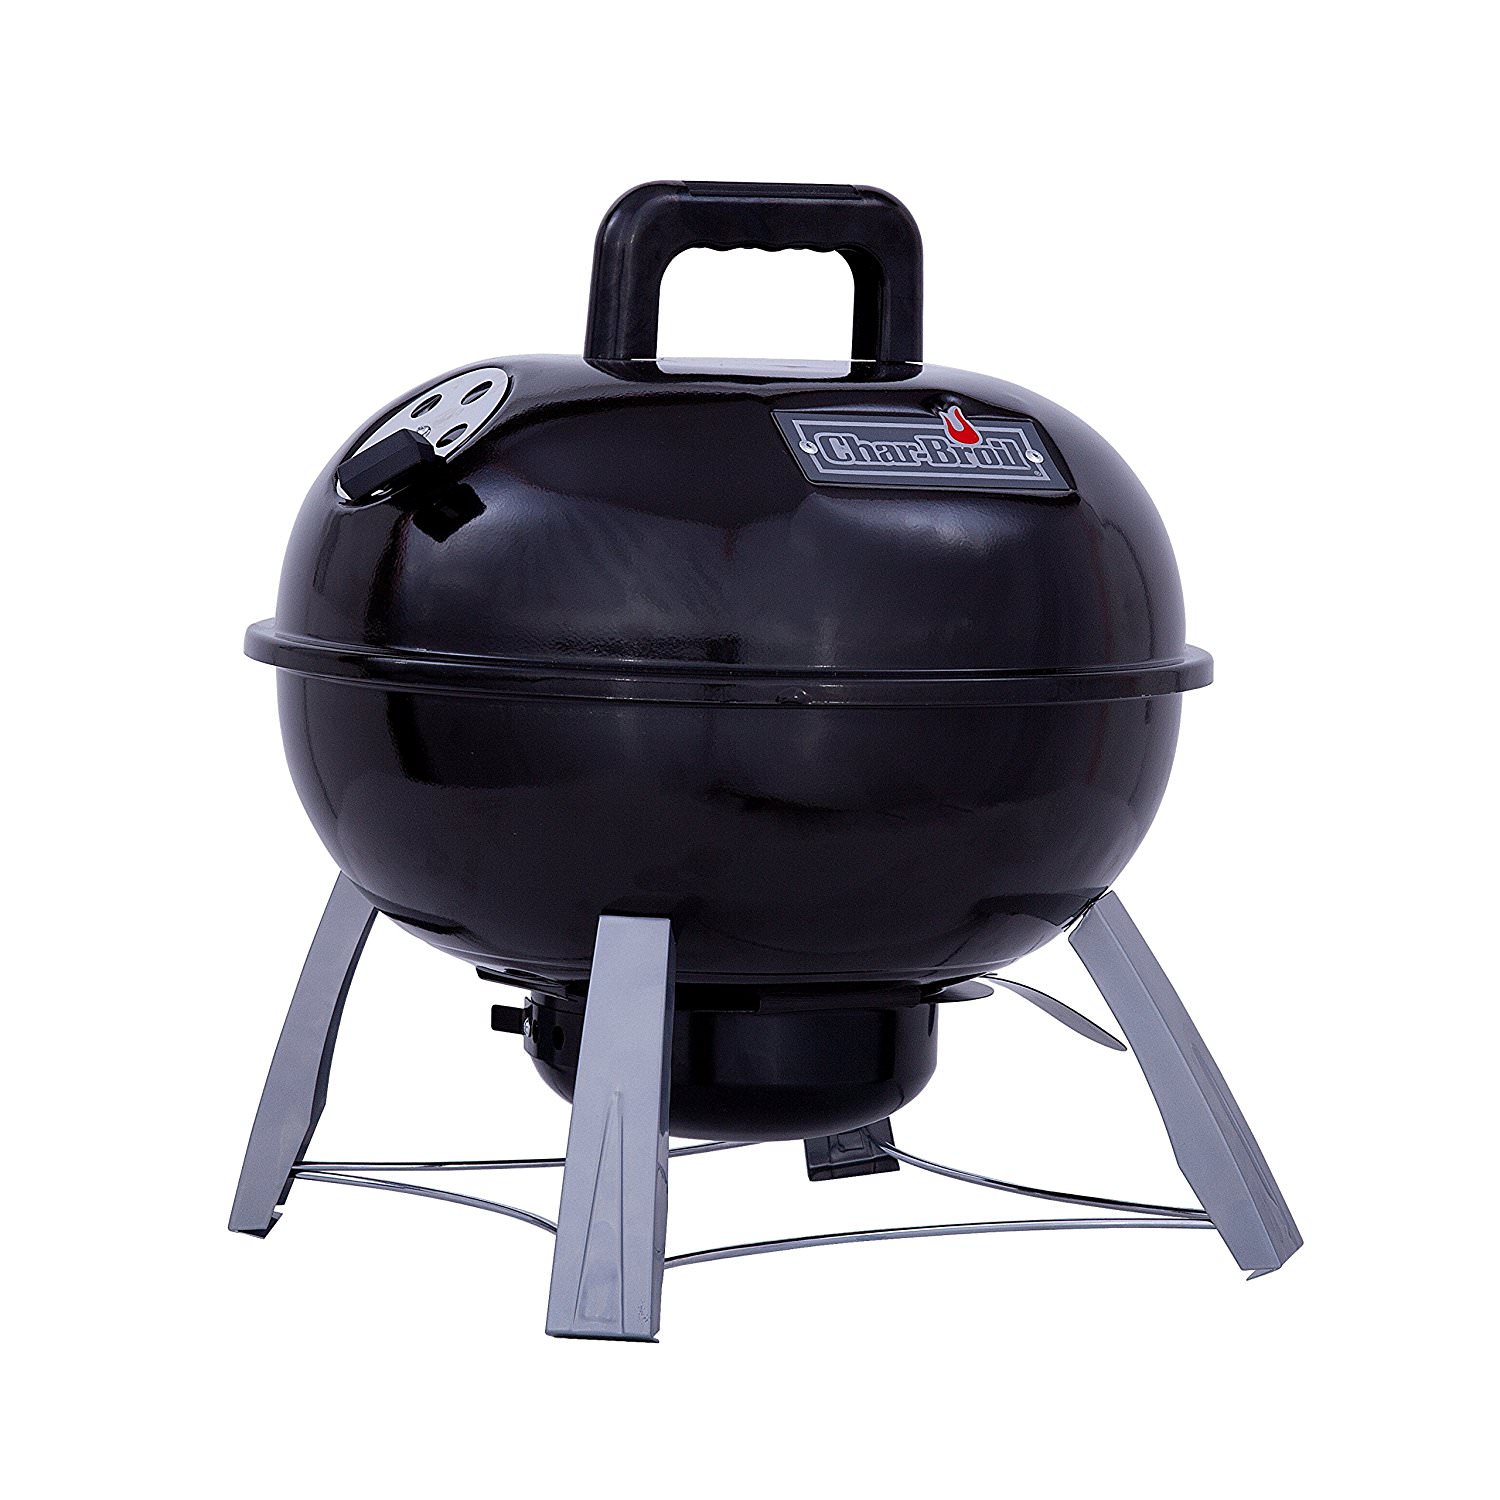 Char-Broil 150 Portable Tabletop Kettle Charcoal Grill - image 5 of 8